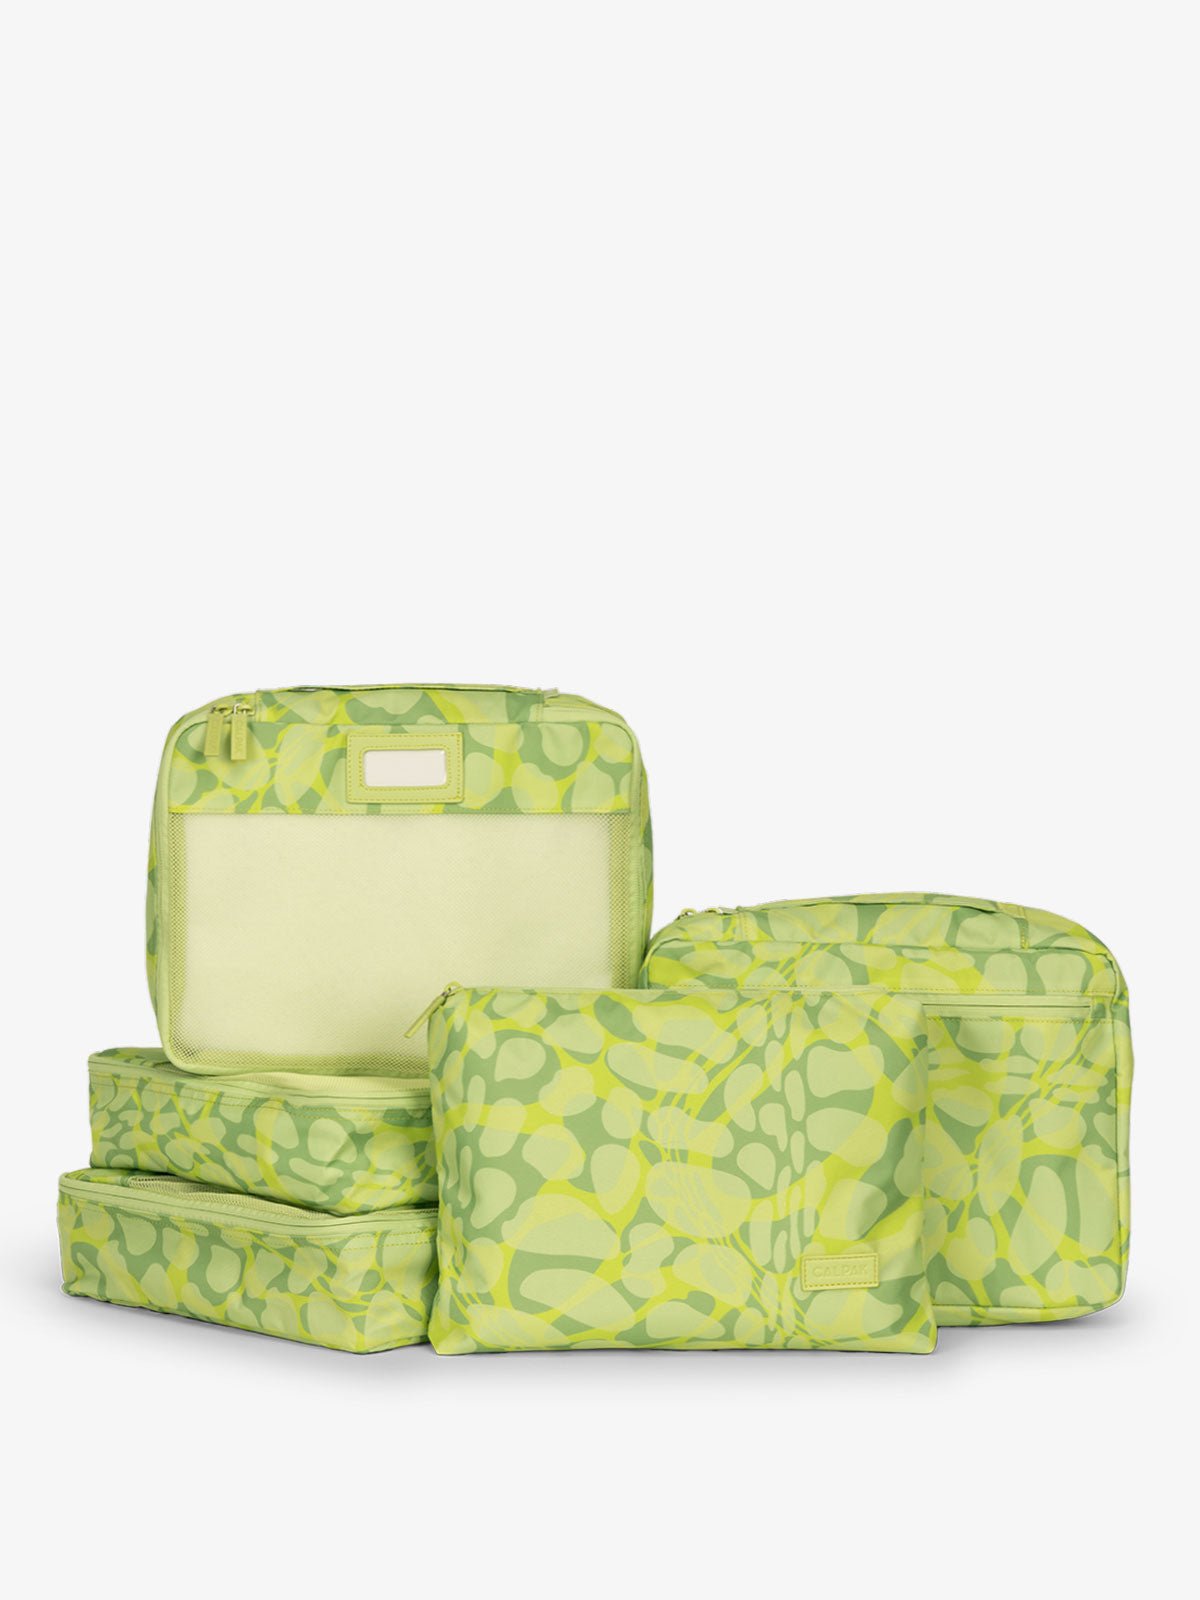 CALPAK 5 piece set packing cubes for travel with labels and top handles in lime green print